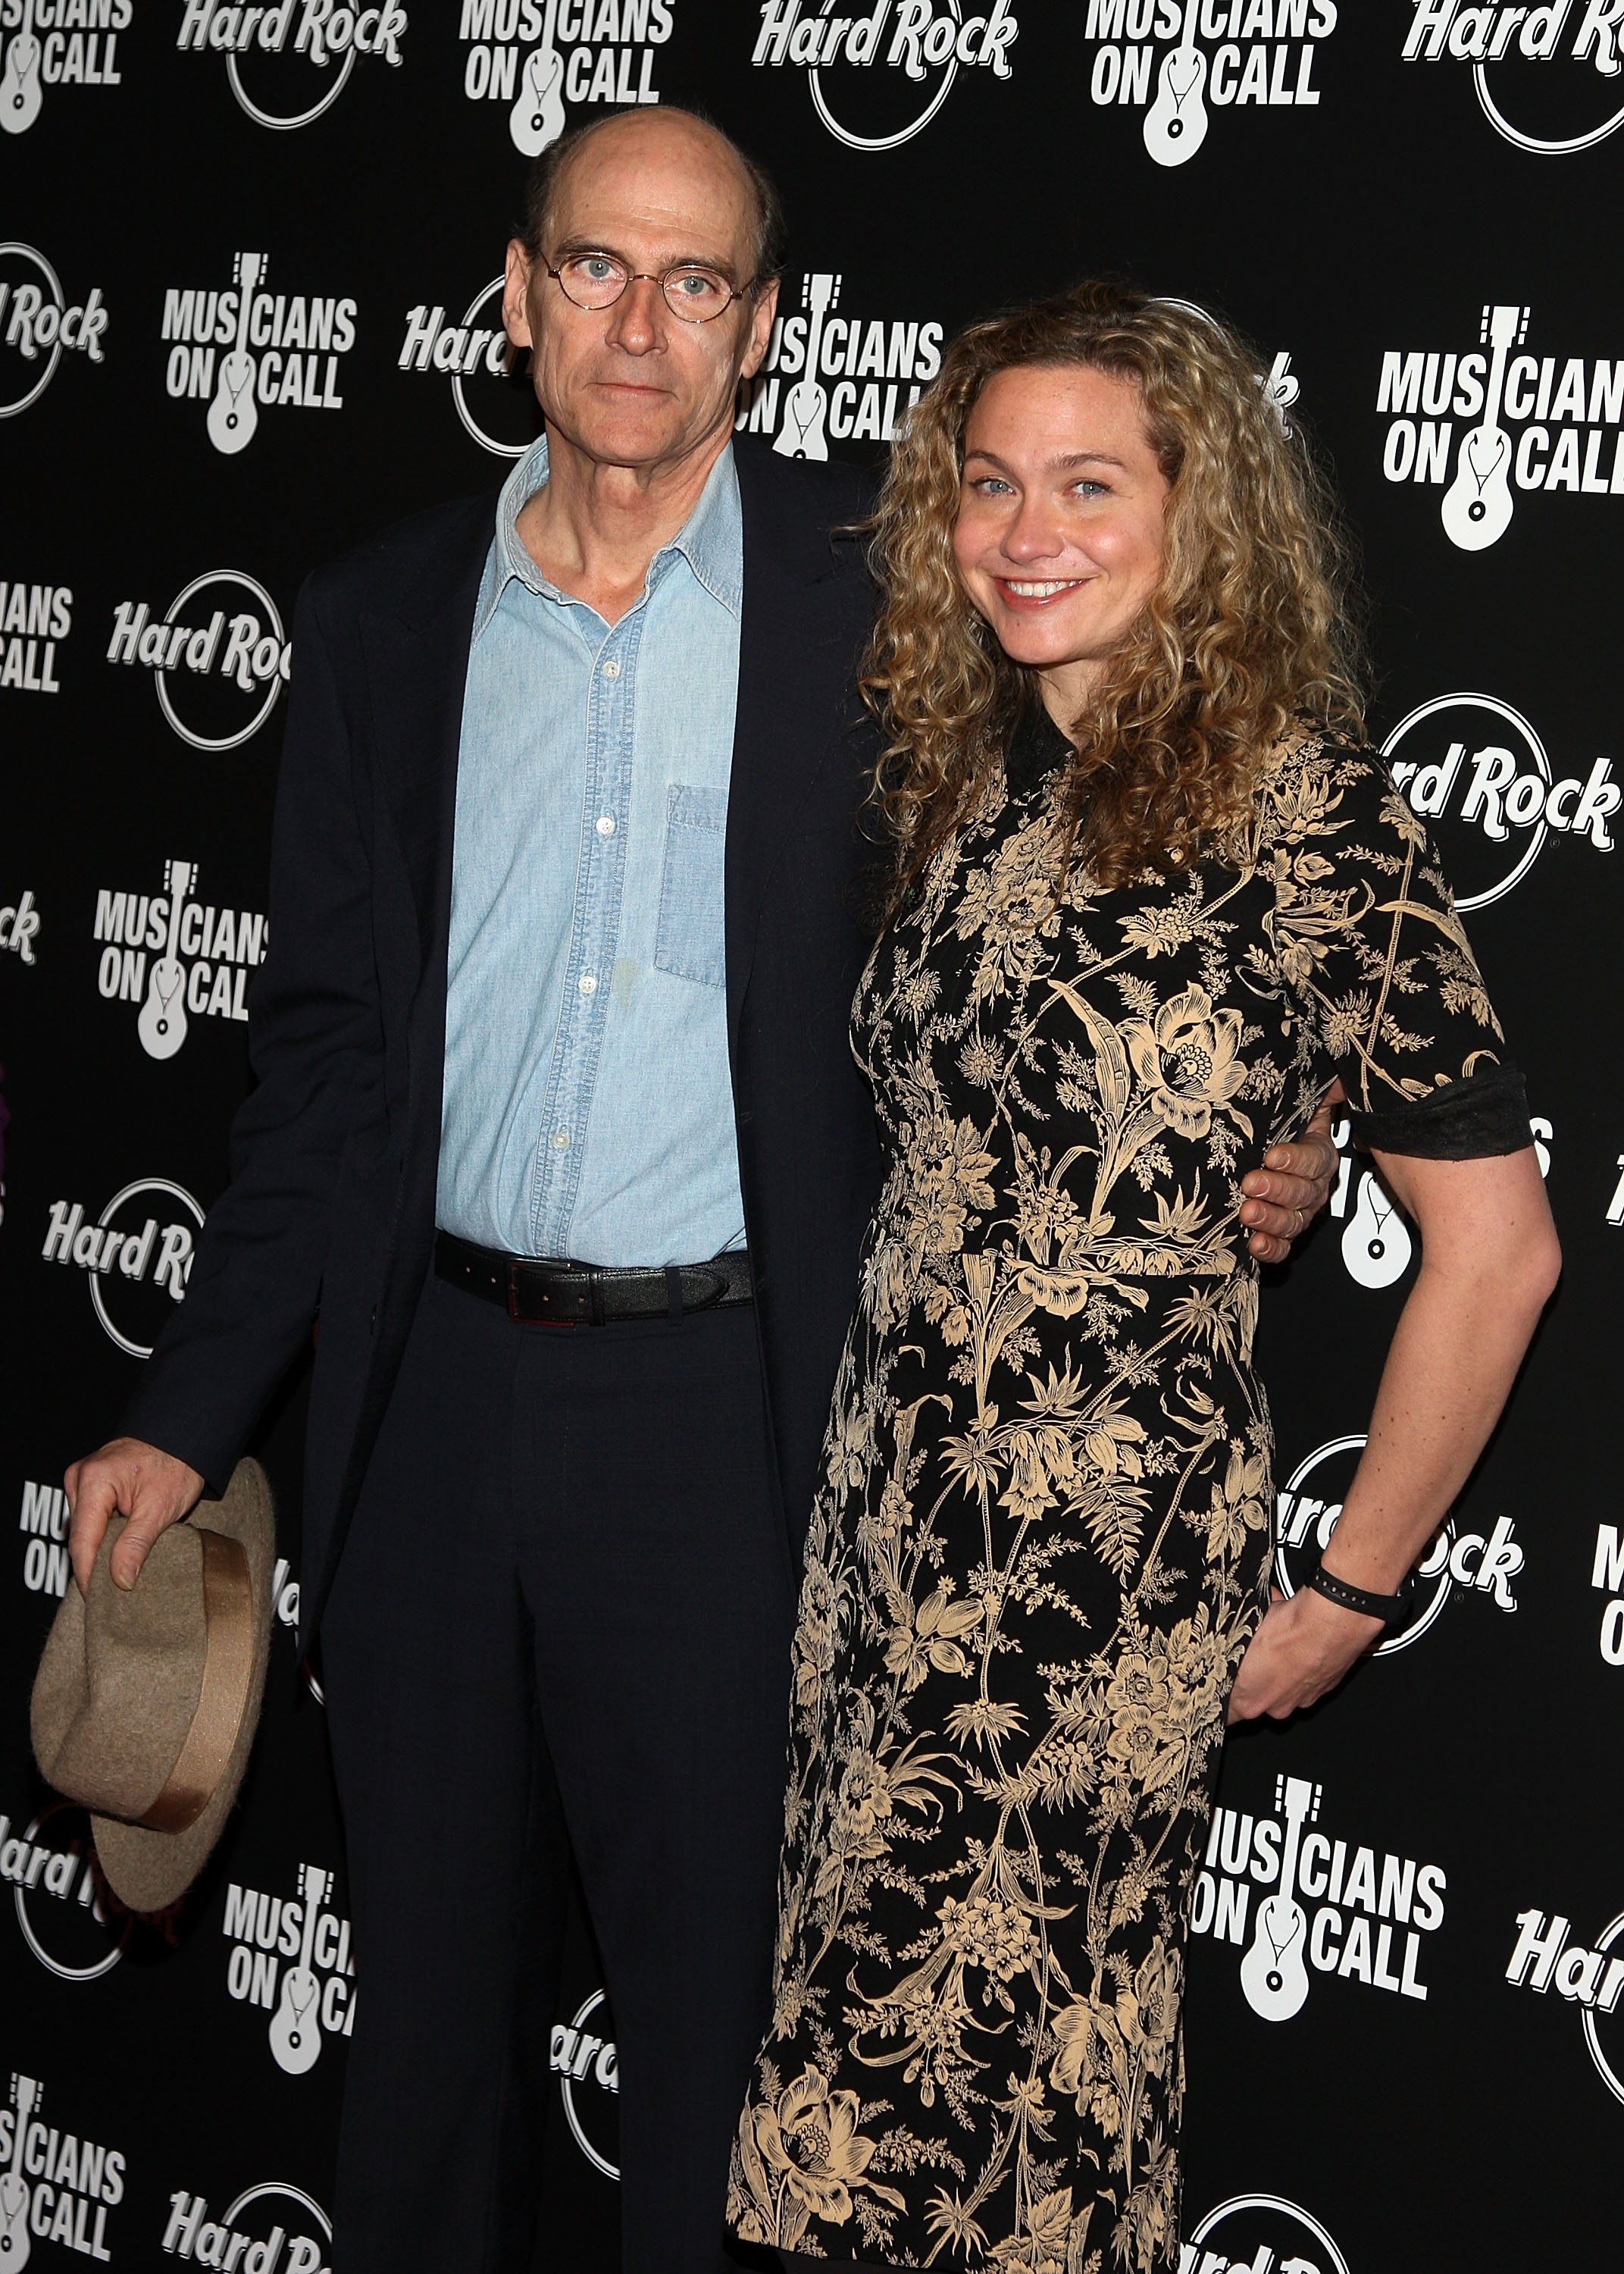 James Taylor and his daughter Sally Taylor at the 5th annual Musicians on Call benefit concert and auction on February 24, 2009, in New York City | Source: Getty Images